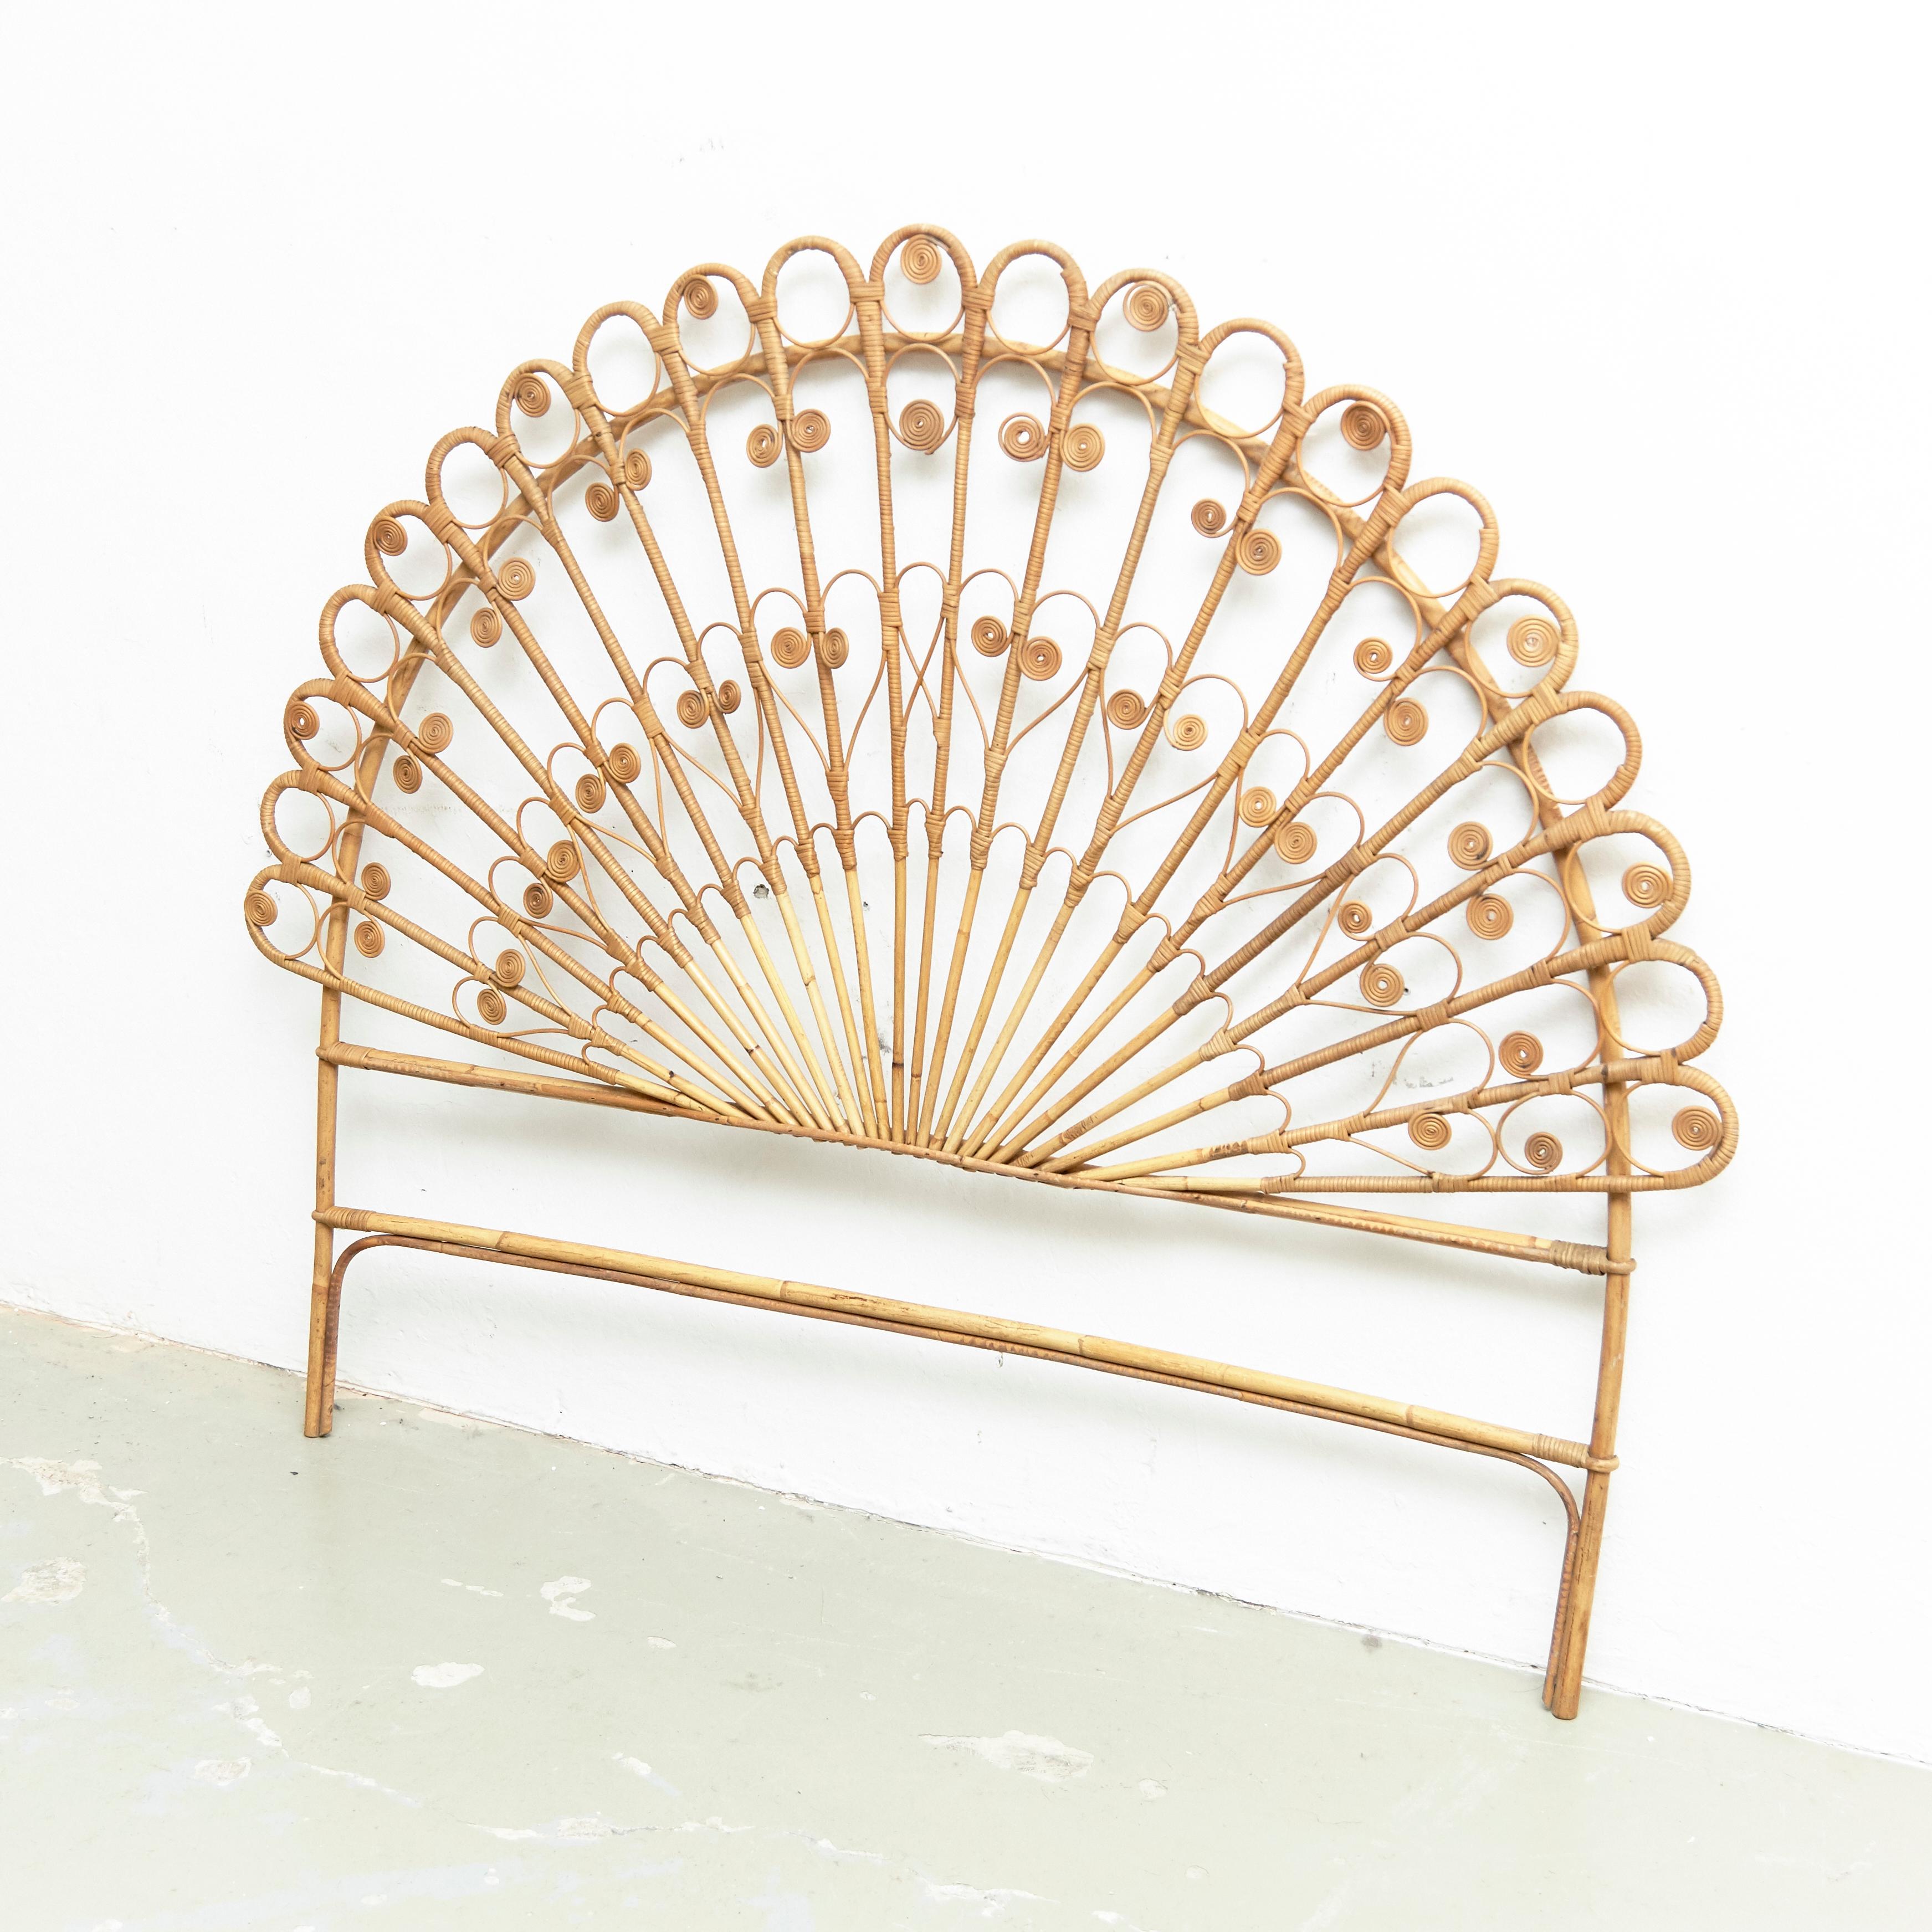 Mid-Century Modern bamboo and rattan headboard, circa 1960
Traditionally manufactured in France.
By unknown designer.

In original condition with minor wear consistent of age and use, preserving a beautiful patina.

Important information regarding